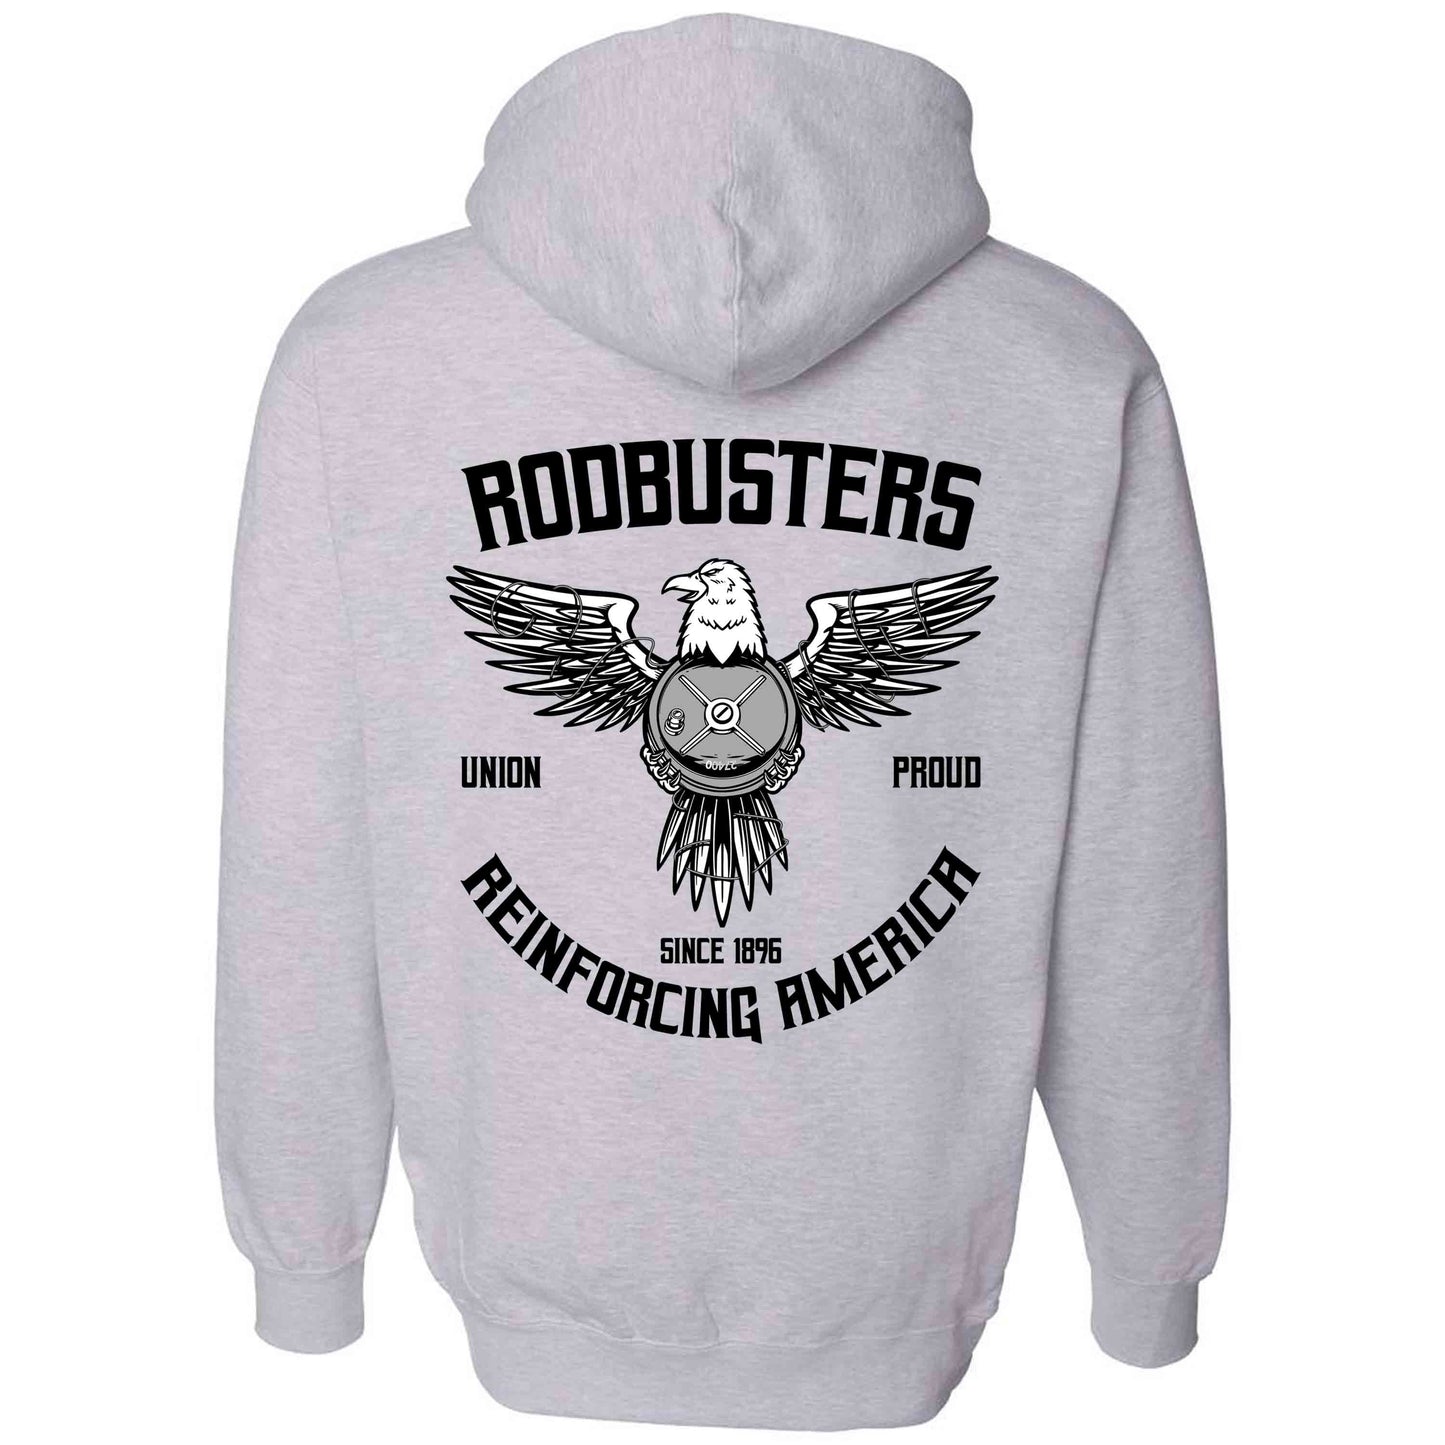 WIRE REEL EAGLE PULLOVER HOODIE